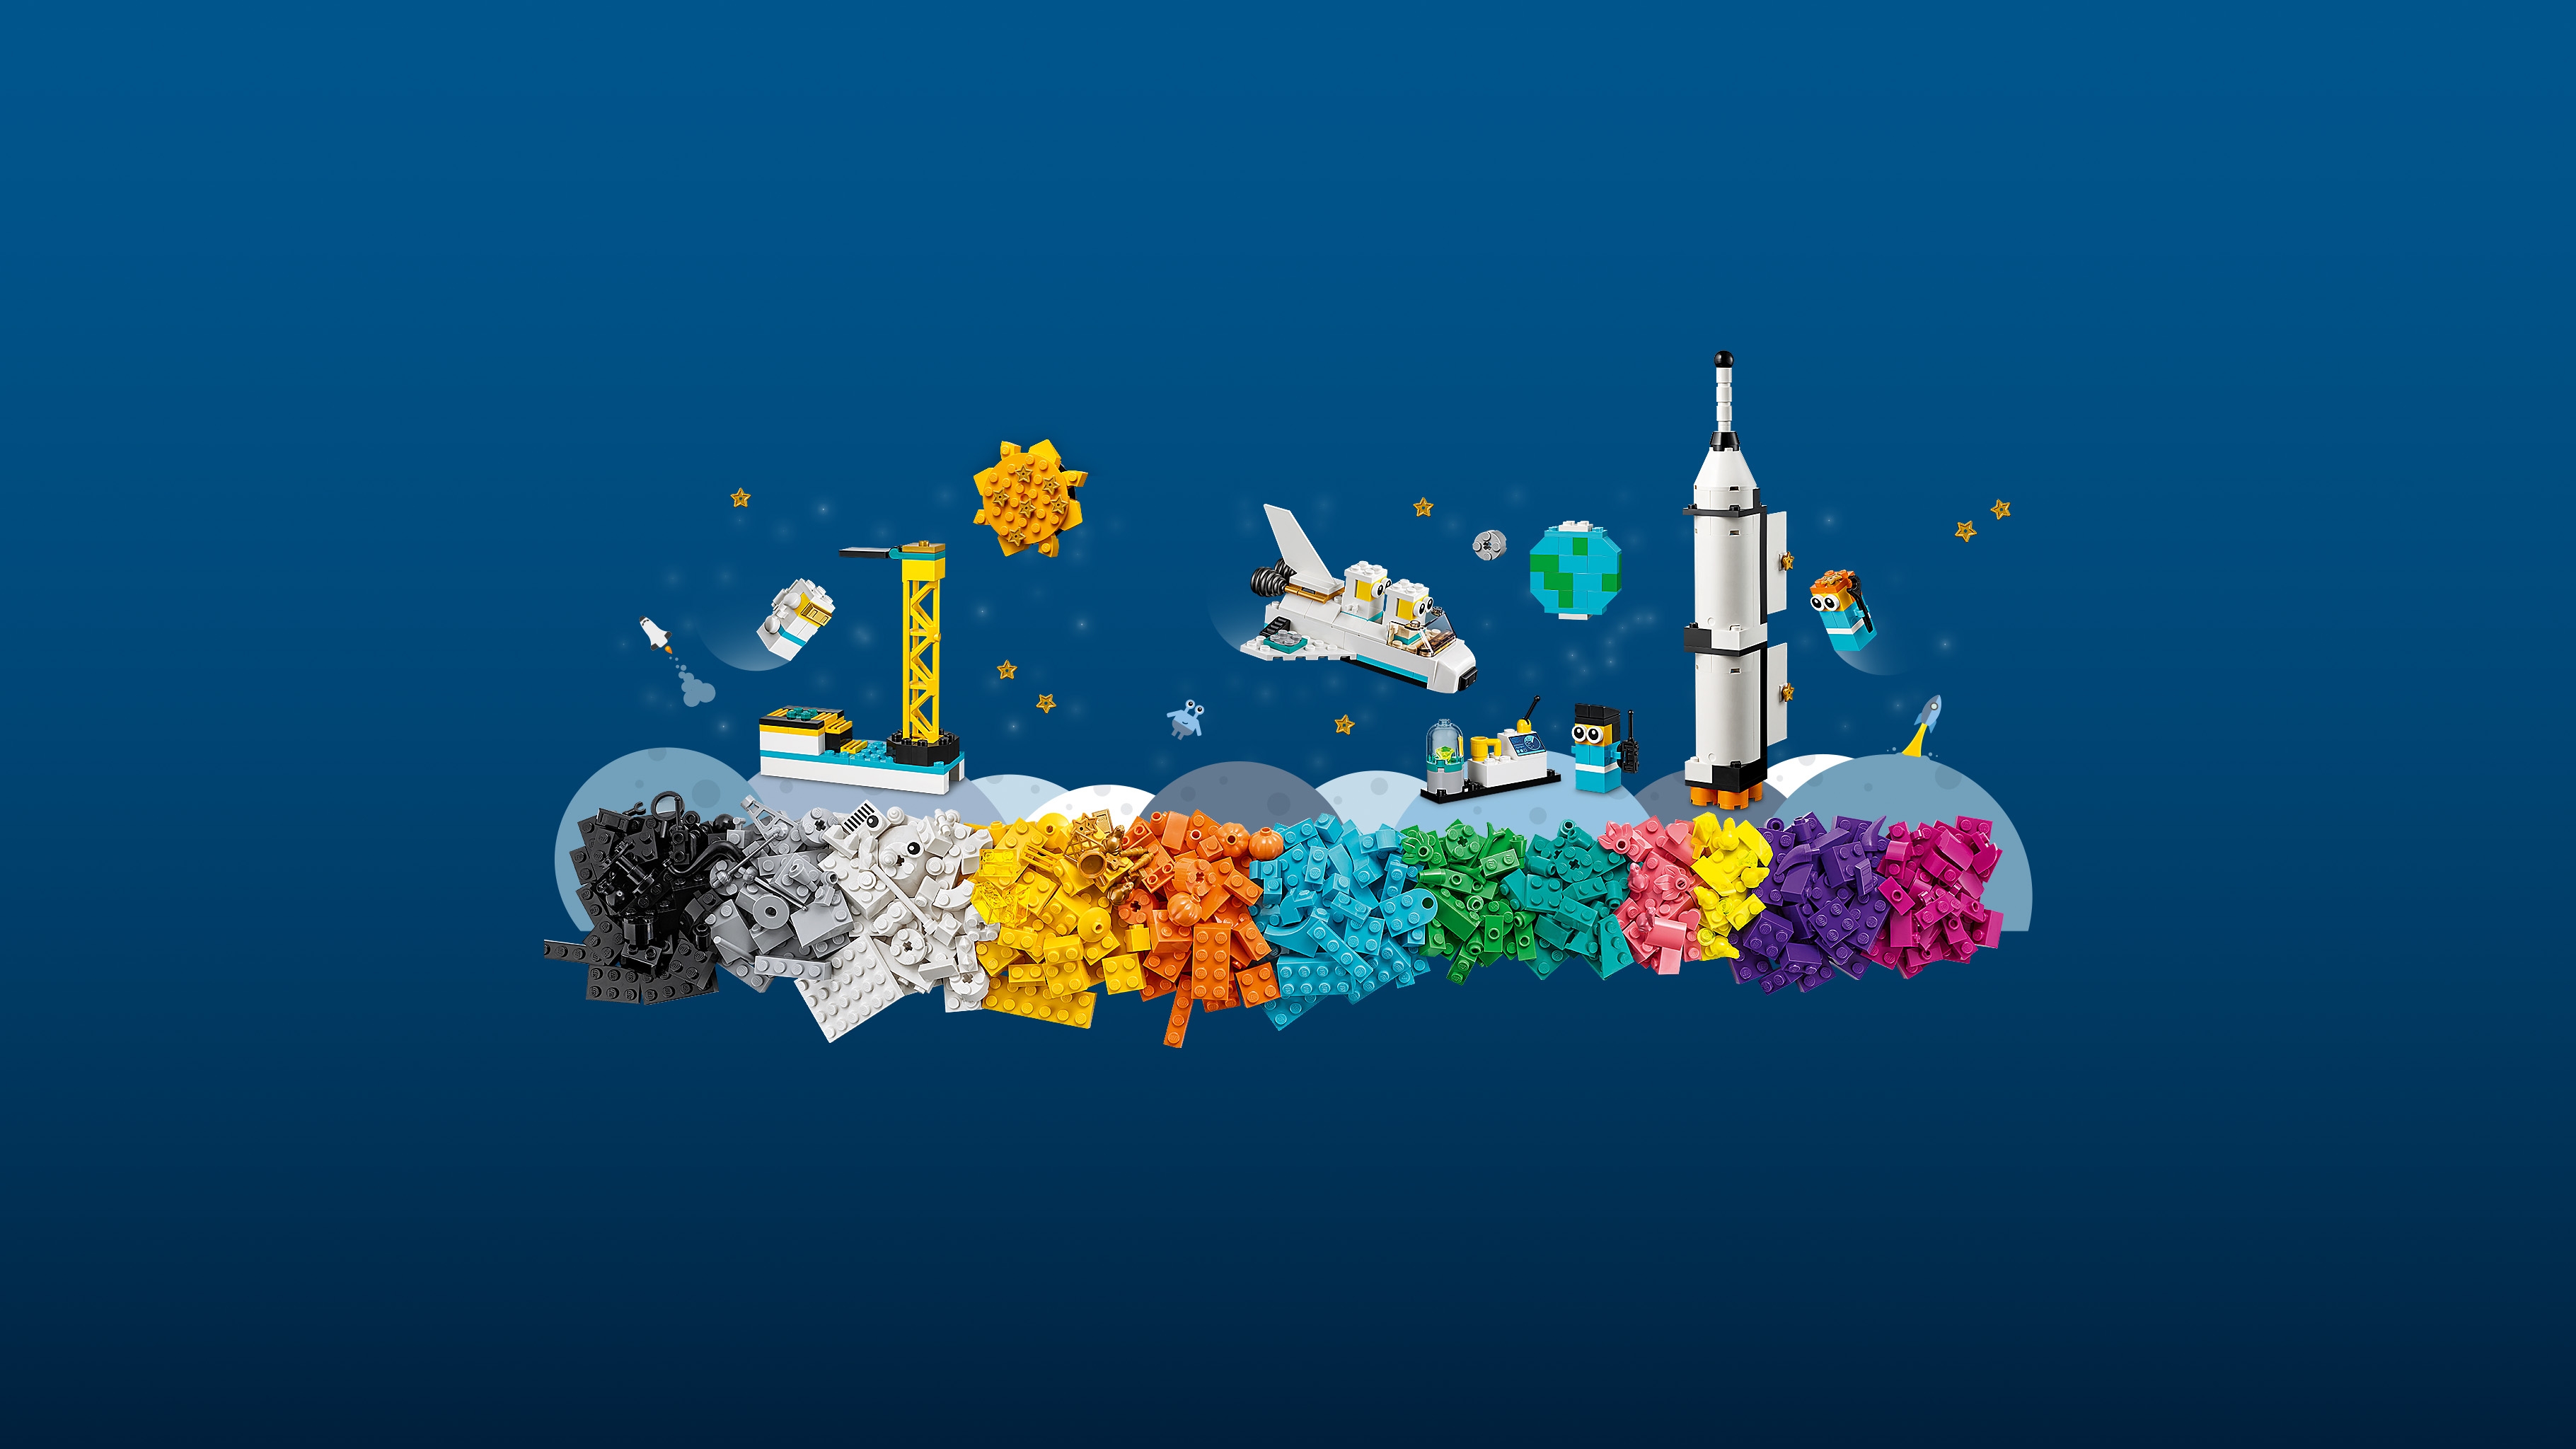 Space Mission 11022® Classic Sets.com for kids